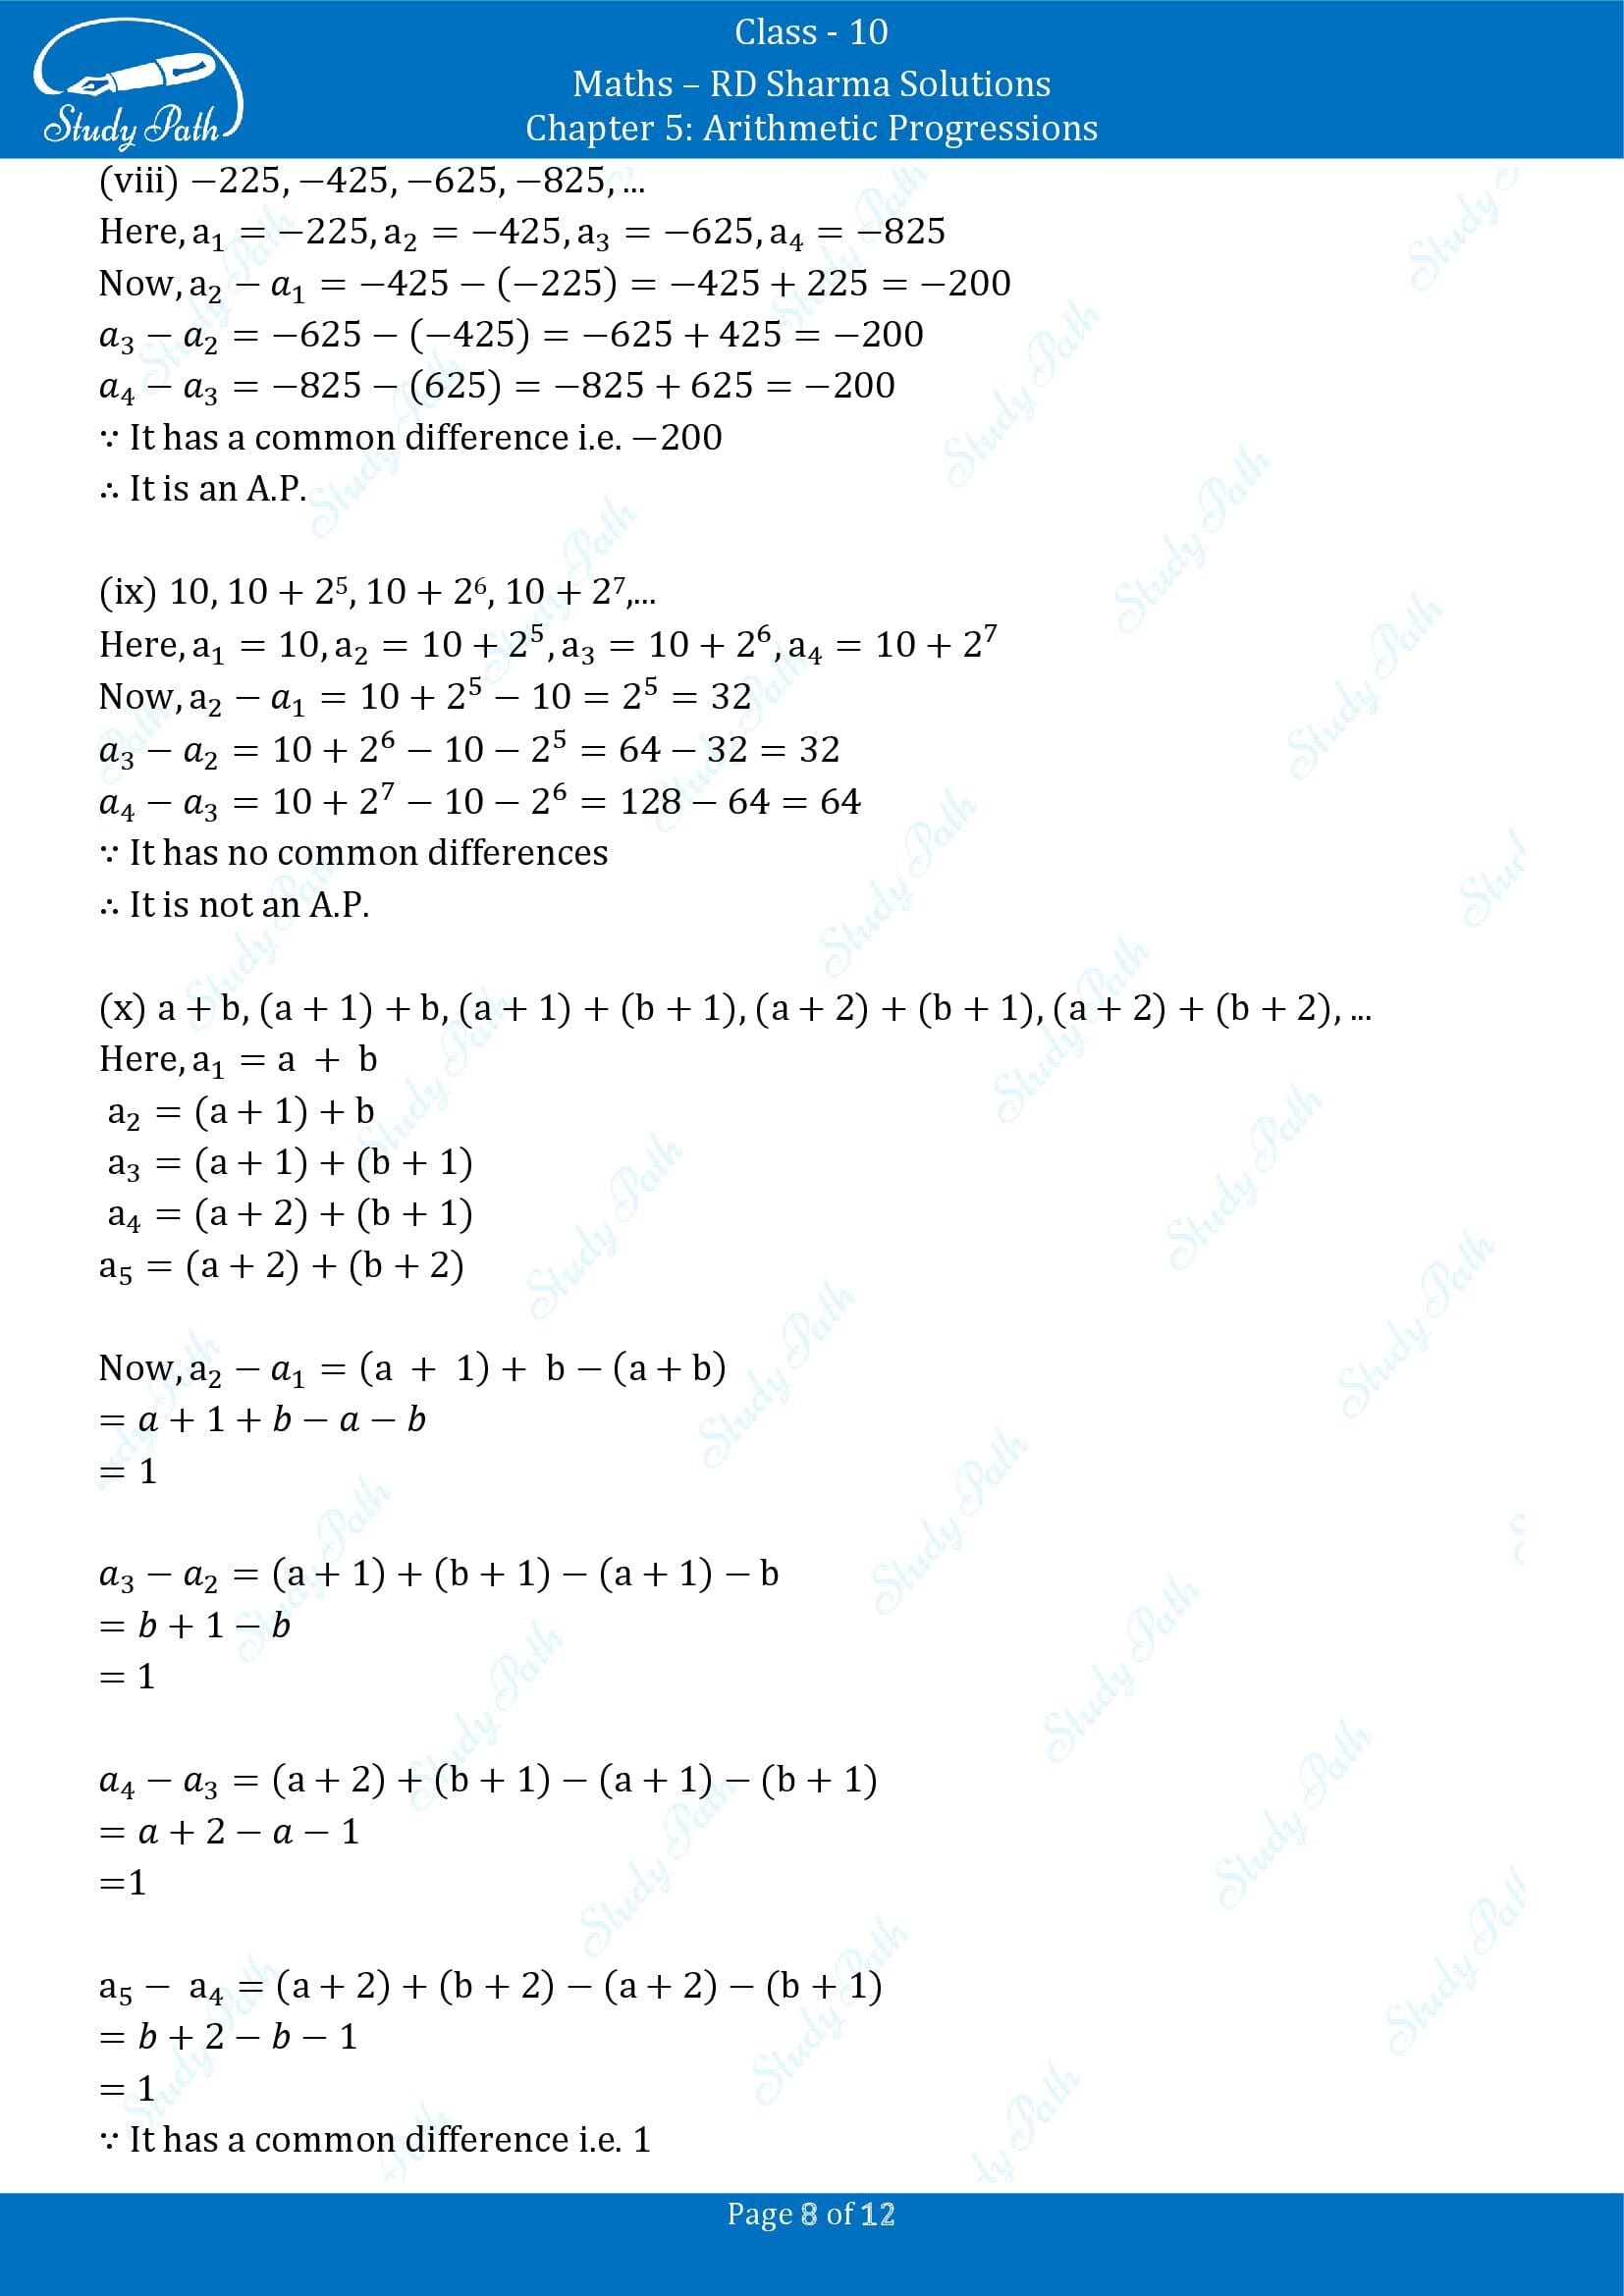 RD Sharma Solutions Class 10 Chapter 5 Arithmetic Progressions Exercise 5.3 00008